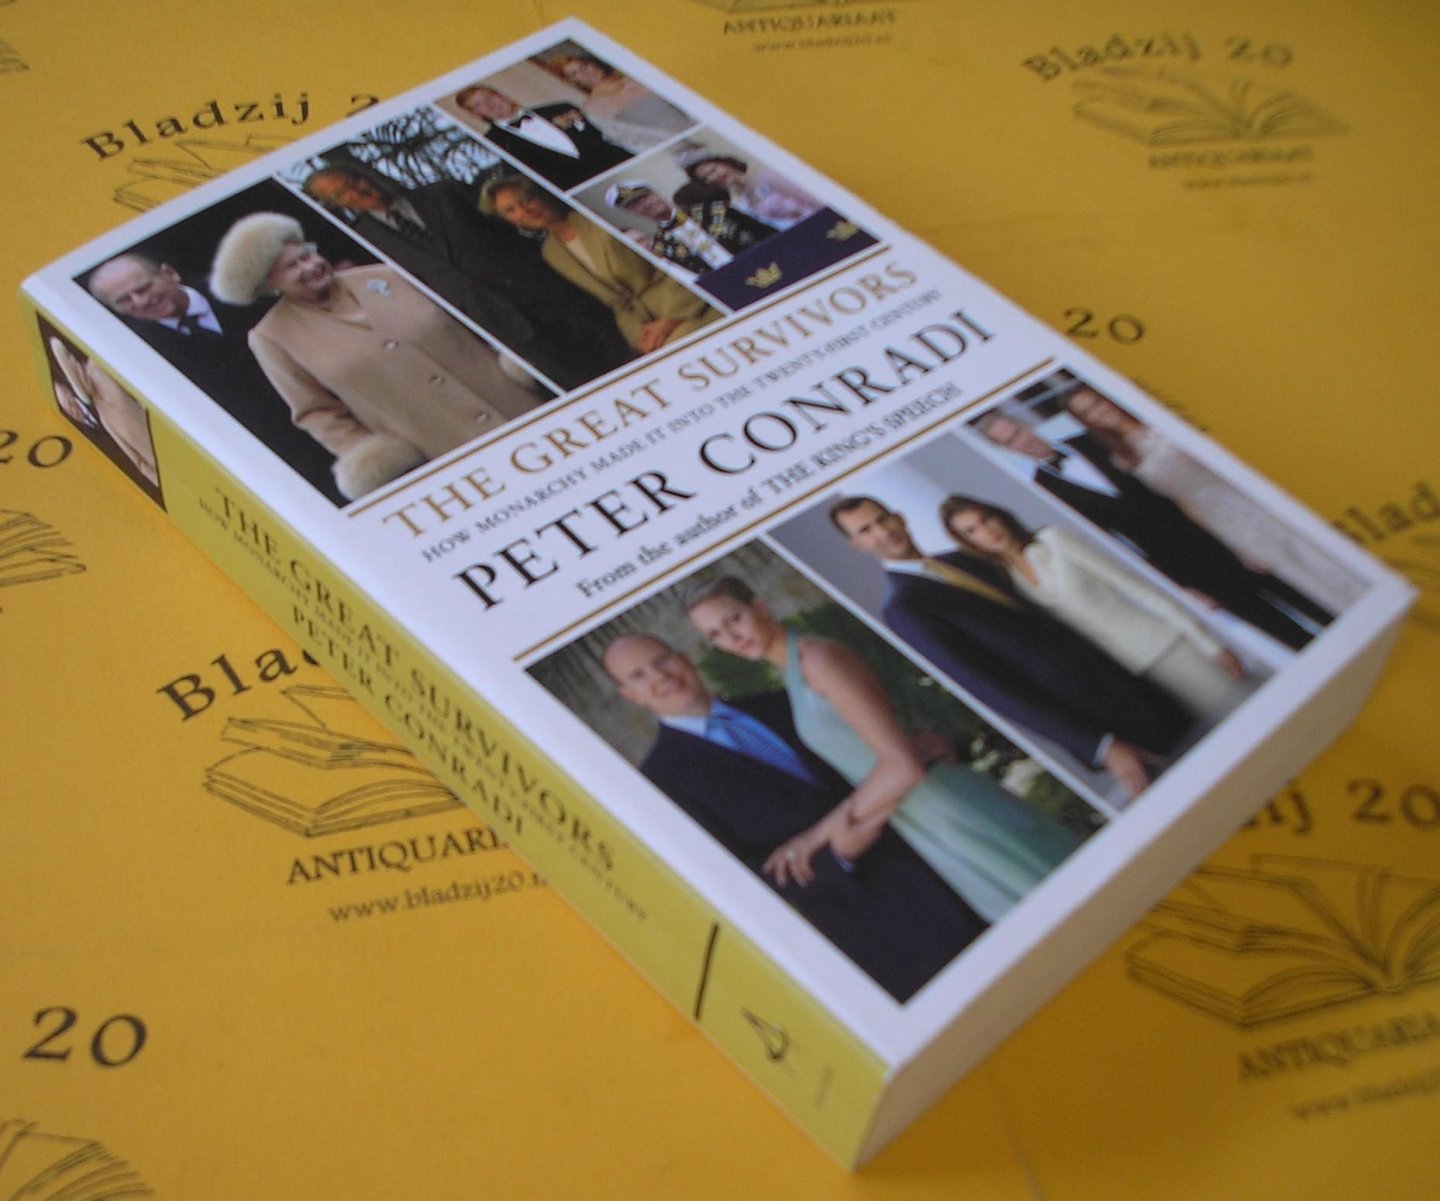 Conradi, Peter. - The great survivors. How monarchy made it into the twenty-first century.